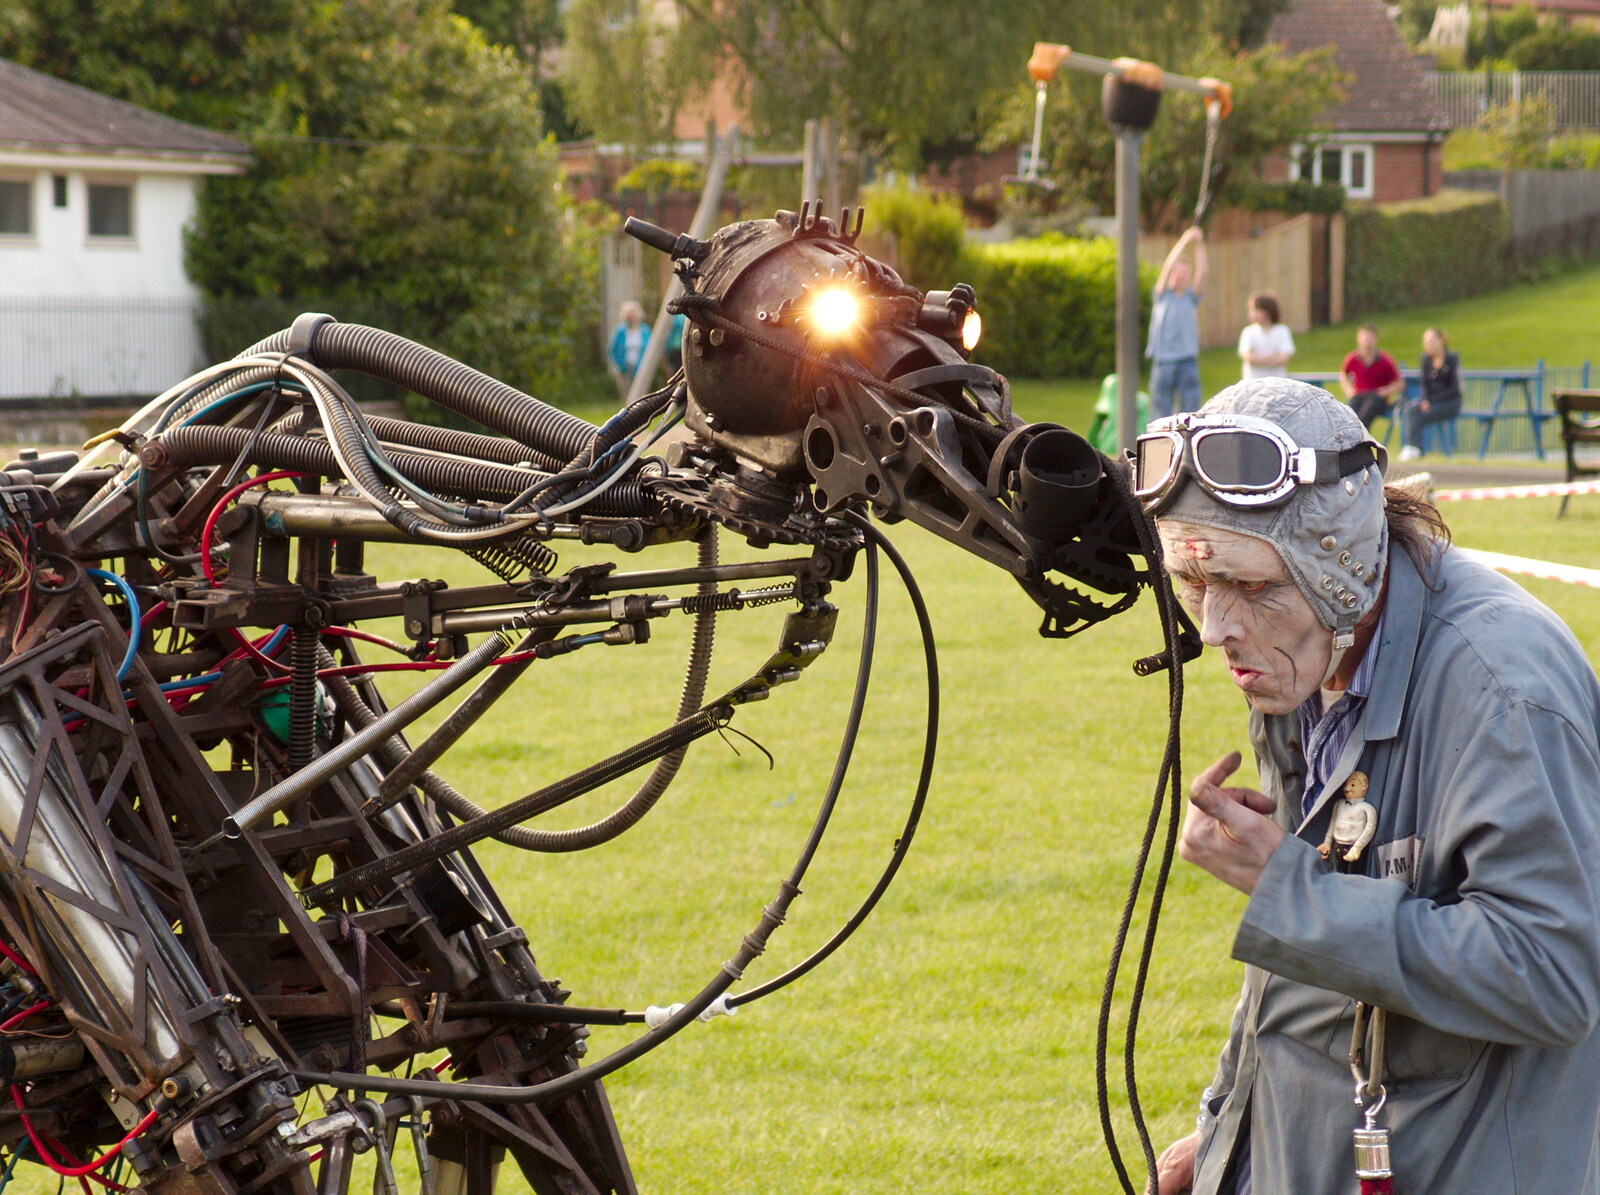 The robot horse is like a Gerald Scarfe nightmare from A Family Fun Day on the Park, Diss, Norfolk - 16th May 2014